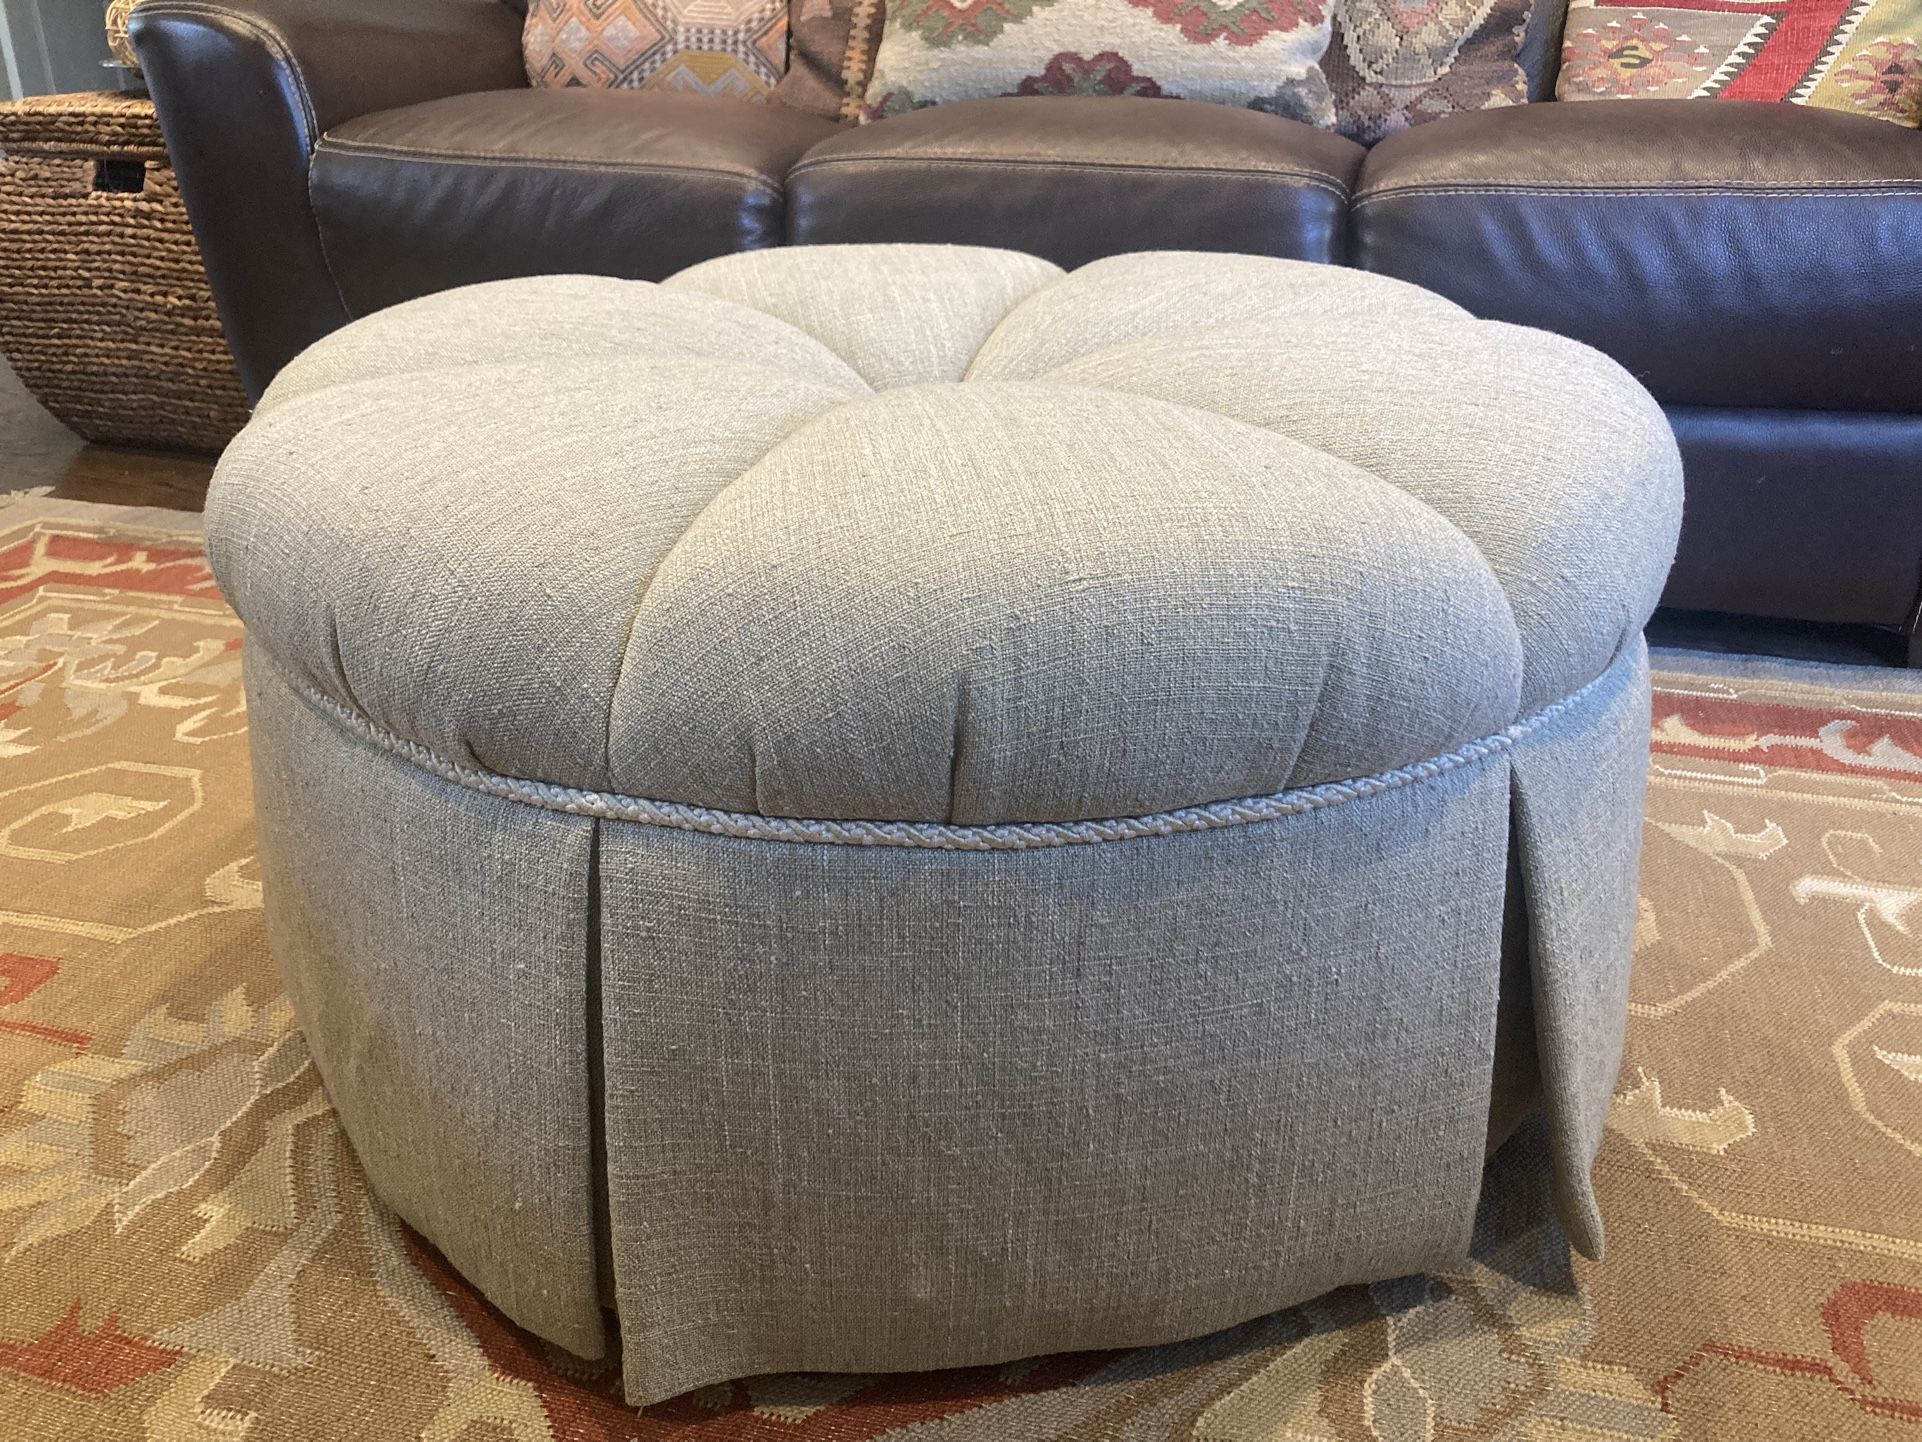 Upholstered Tufted Classy Ottoman 